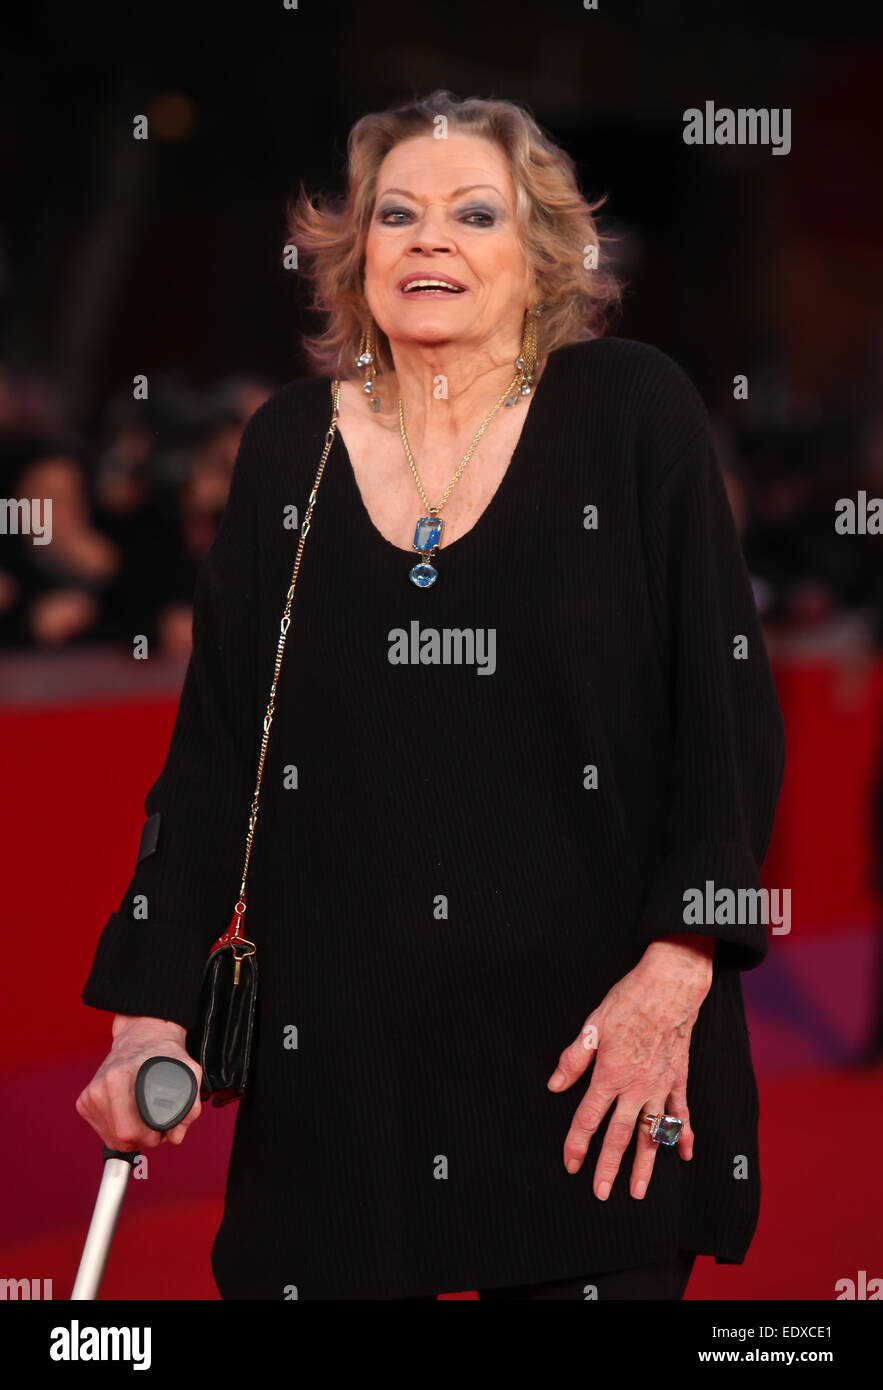 Actress Anita Ekberg attends the premiere of the new version of 'La Dolce Vita' during the 5th  International Rome Film Festival at Auditorium Parco della Musica in Rome, Italy, 30 October 2010. Photo: Hubert Boesl Stock Photo